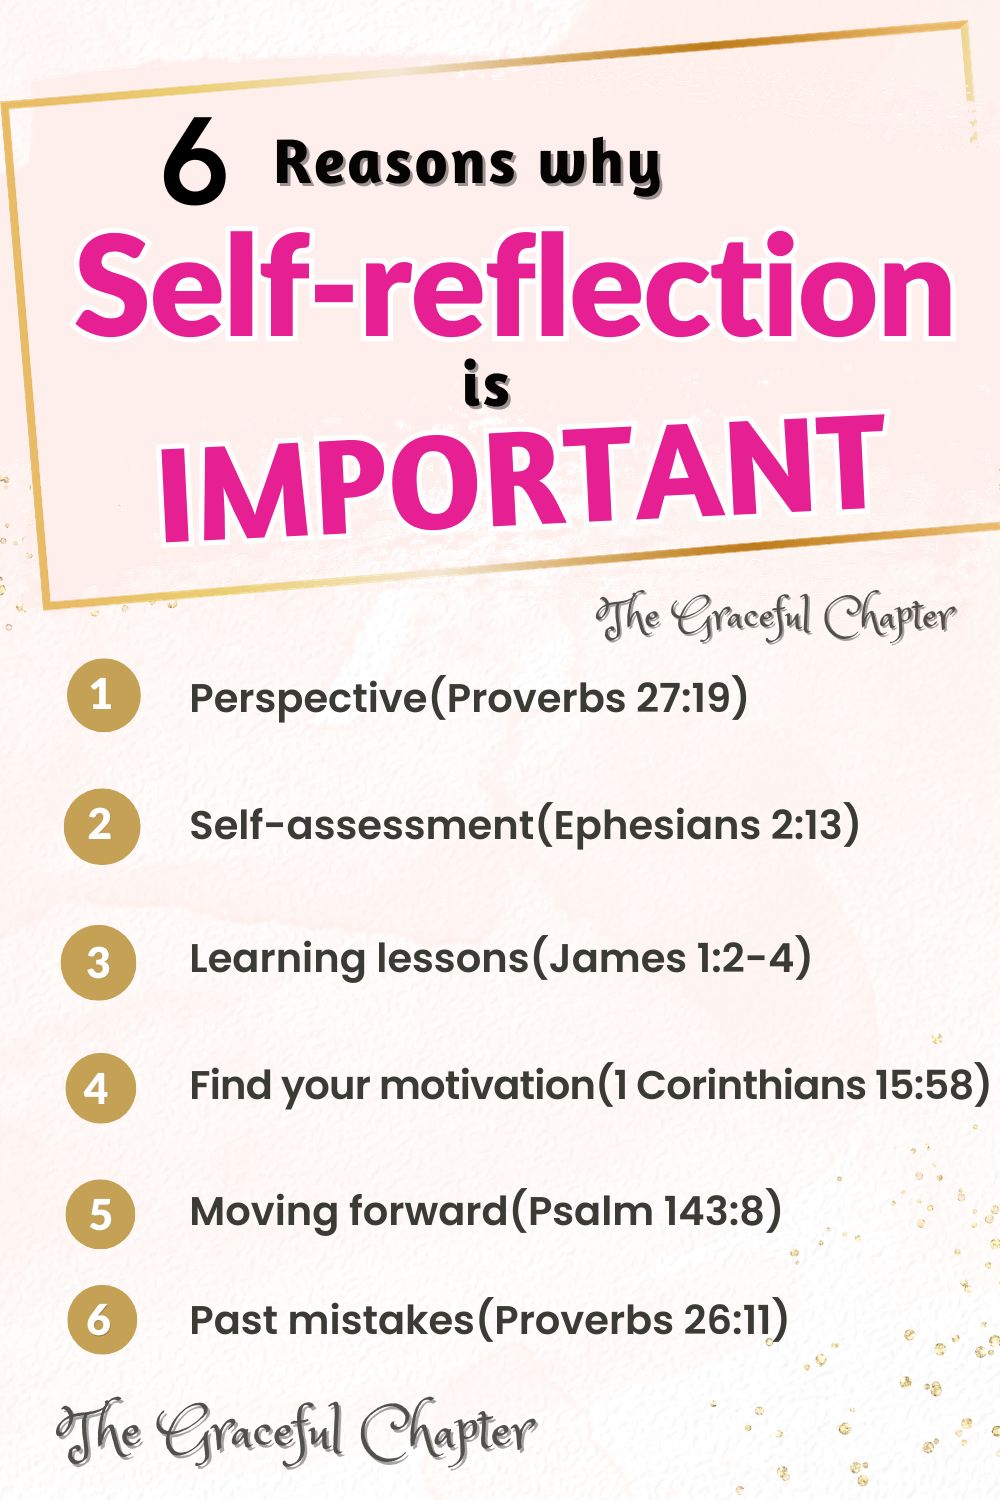 Reasons why self-reflection is important